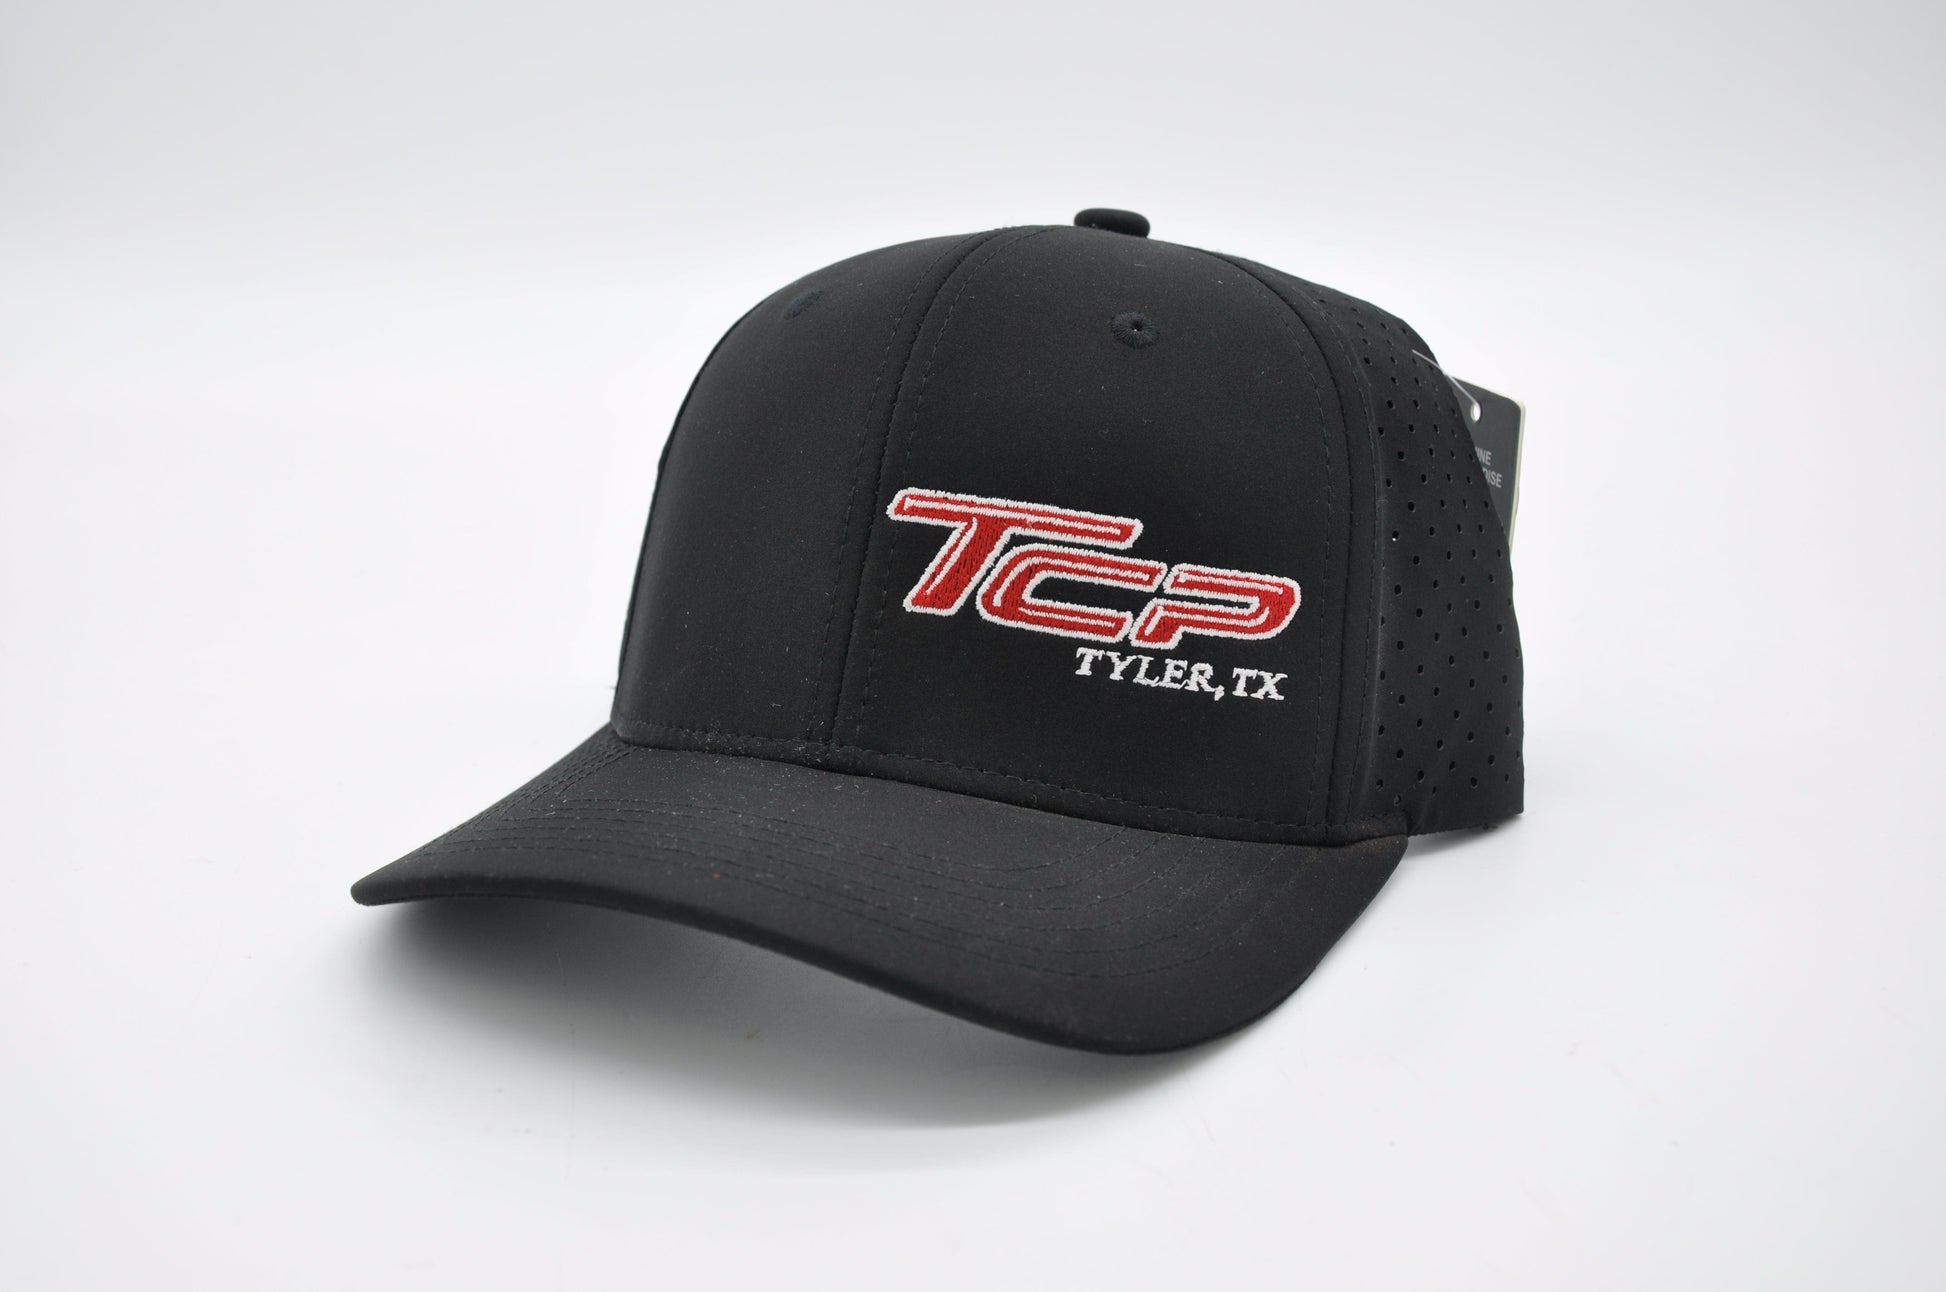 TCP Assorted Mesh Hats (Black, Red, and Grey Mesh) TCP Pro Racing Apparel